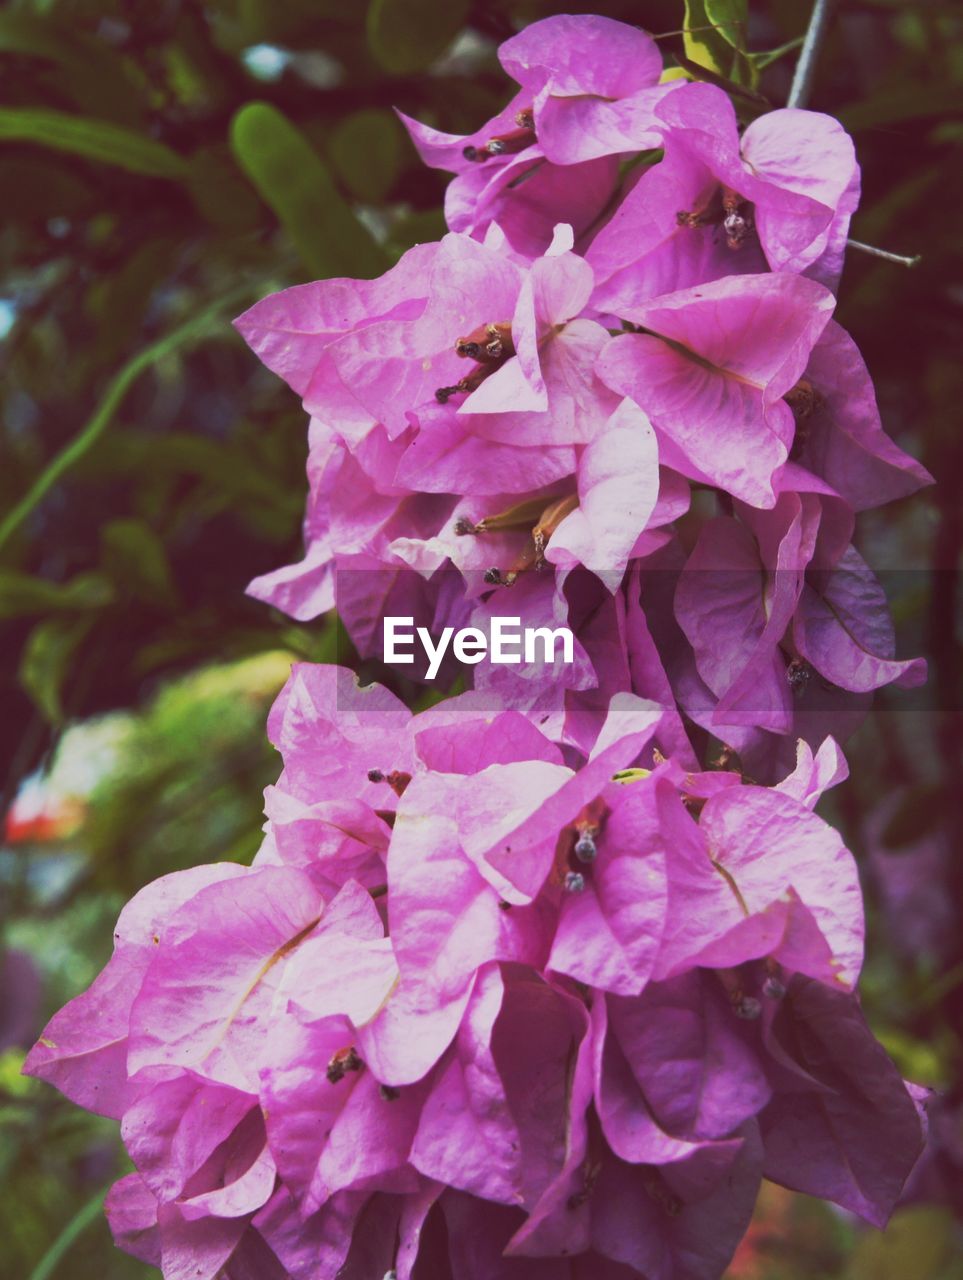 plant, flower, flowering plant, beauty in nature, pink, freshness, close-up, fragility, petal, growth, nature, inflorescence, flower head, focus on foreground, purple, no people, lilac, day, springtime, magenta, plant part, outdoors, blossom, leaf, bougainvillea, botany, tree